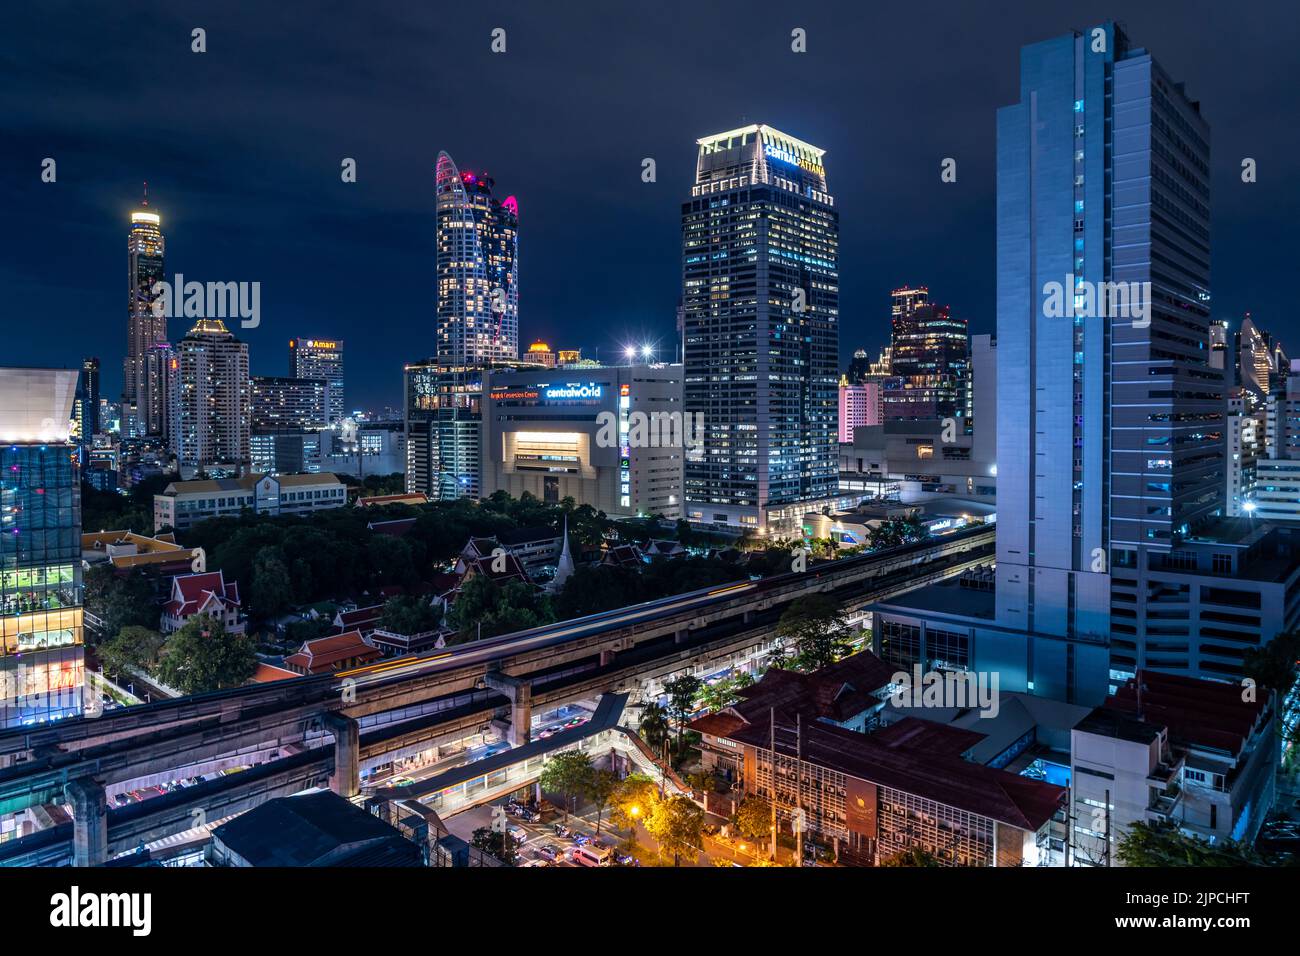 Bangkok, Thailand - 10 August 2022 - Aerial view of Bangkok cityscape at night after sunset showing high-rises and running BTS skytrains Stock Photo